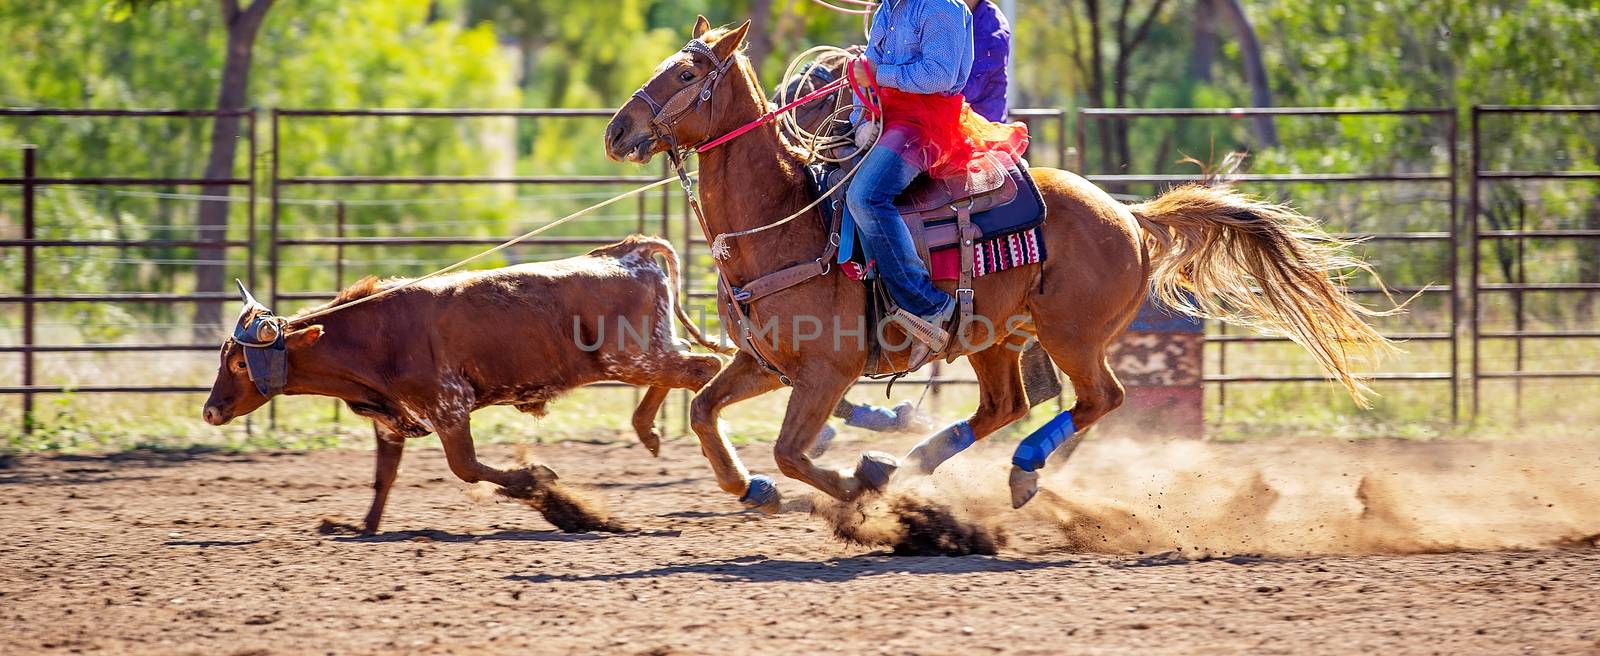 Calf being lassoed by cowboys on horseback in a dusty country paddock